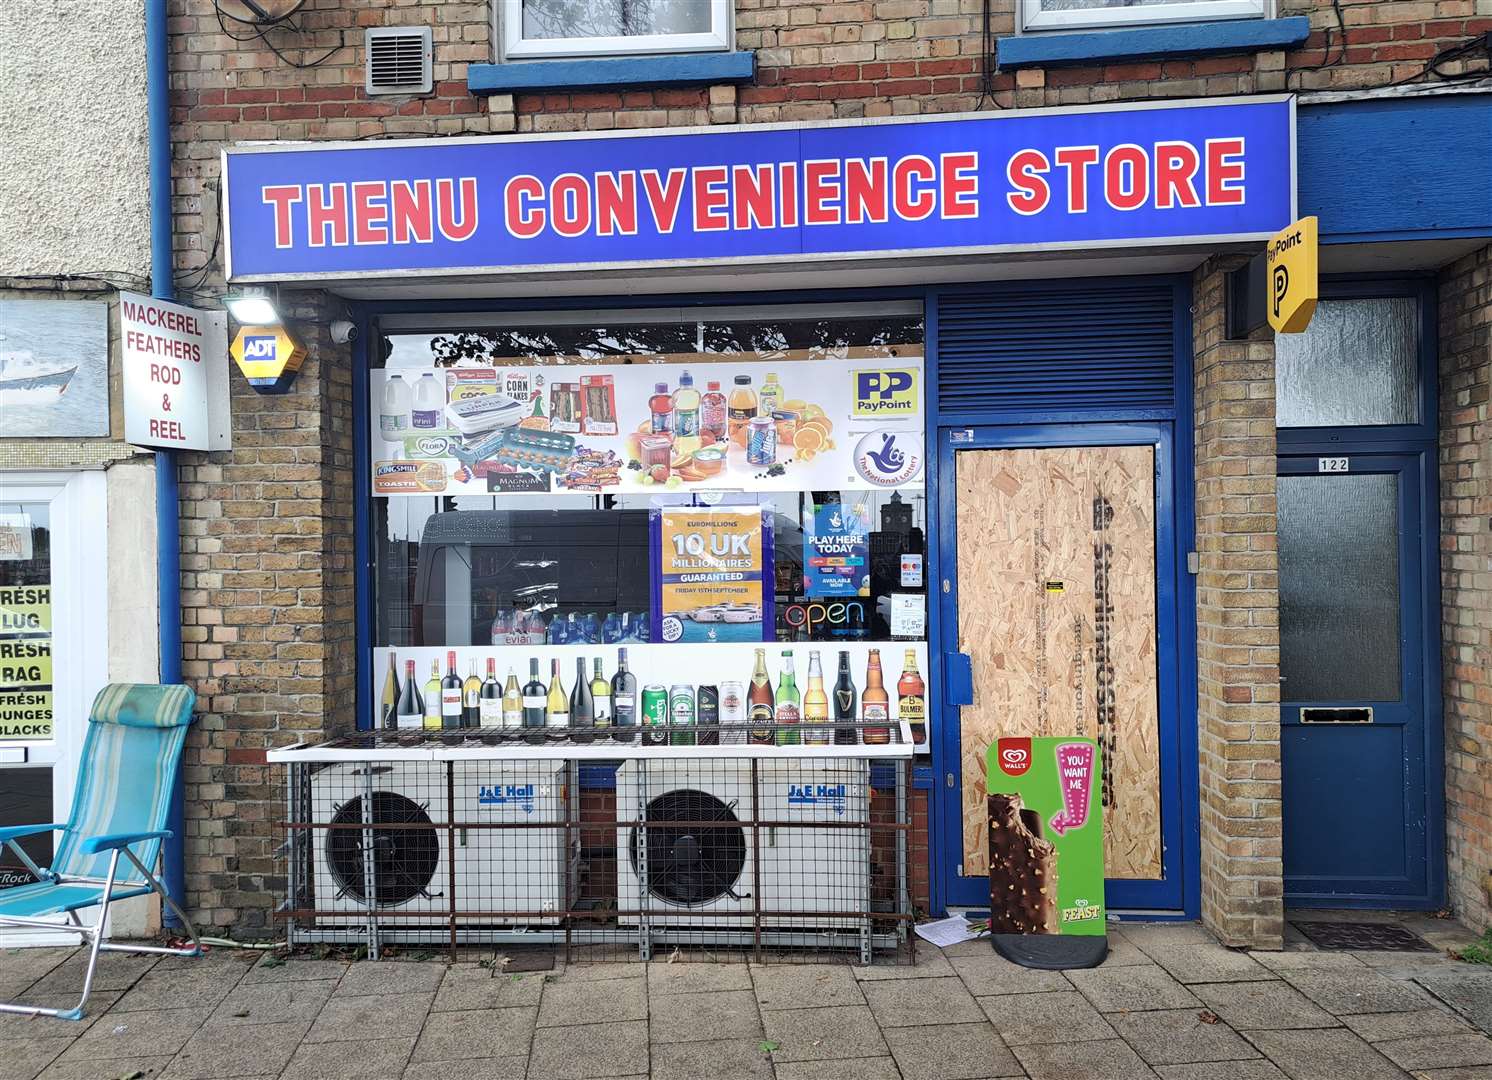 The door to Thenu Convenience Store in Snargate Street, Dover, was boarded up after the incident